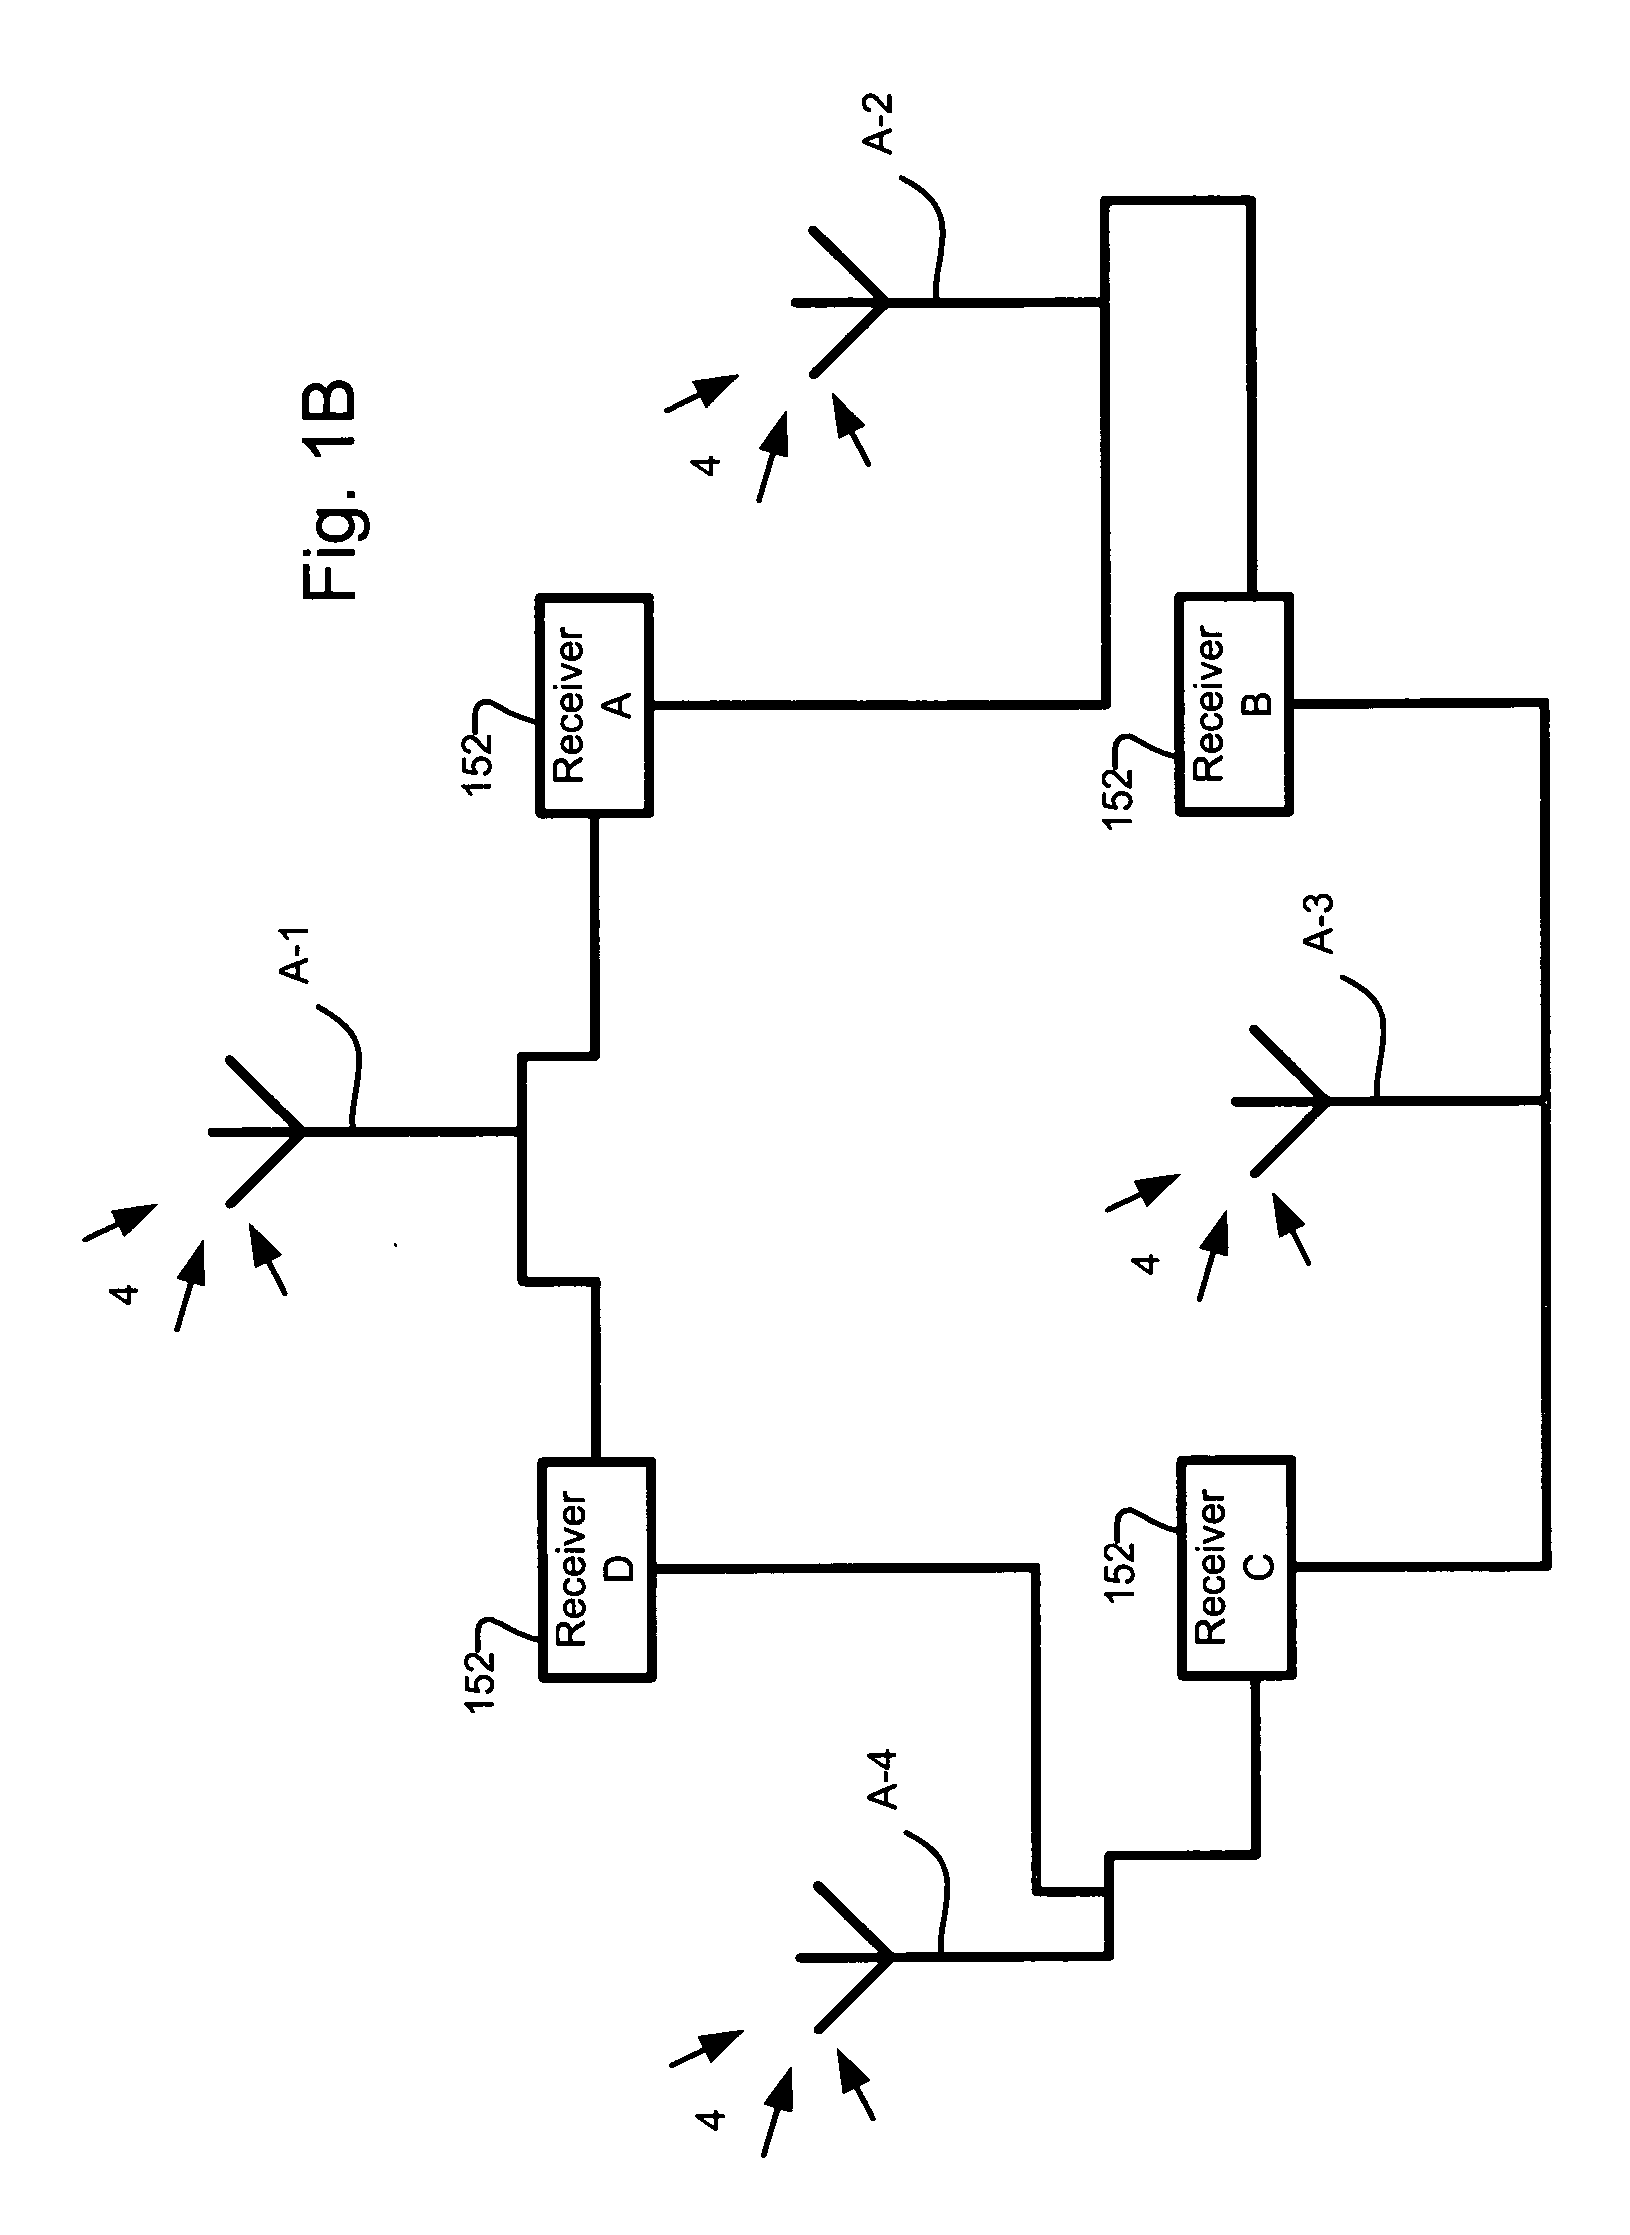 GNSS line bias measurement system and method